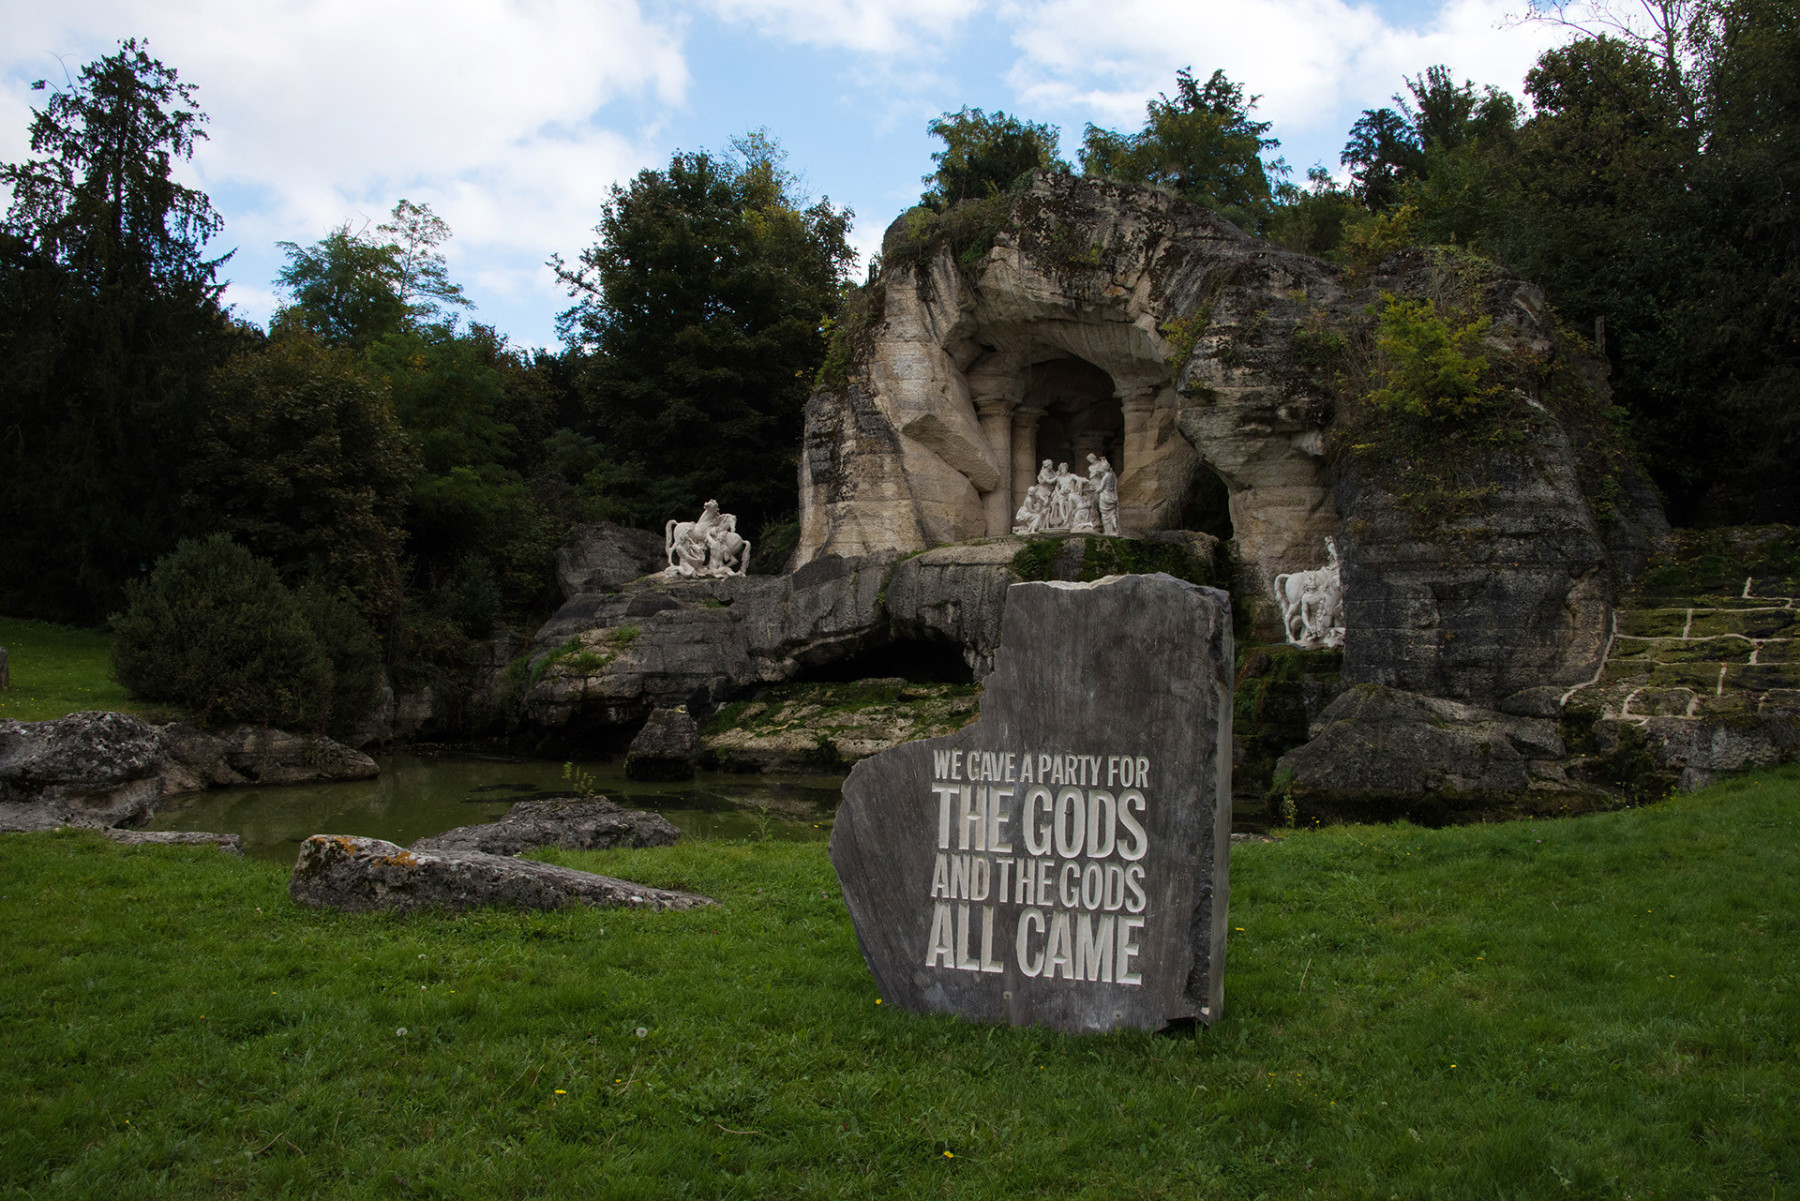 John Giorno&amp;#39;s bluestone poem WE GAVE A PARTY FOR THE GODS AND THE GODS ALL CAME at Chateau des Versailles&amp;nbsp;for Voyage d&amp;#39;hiver: The groves of Versailles,&amp;nbsp;2018